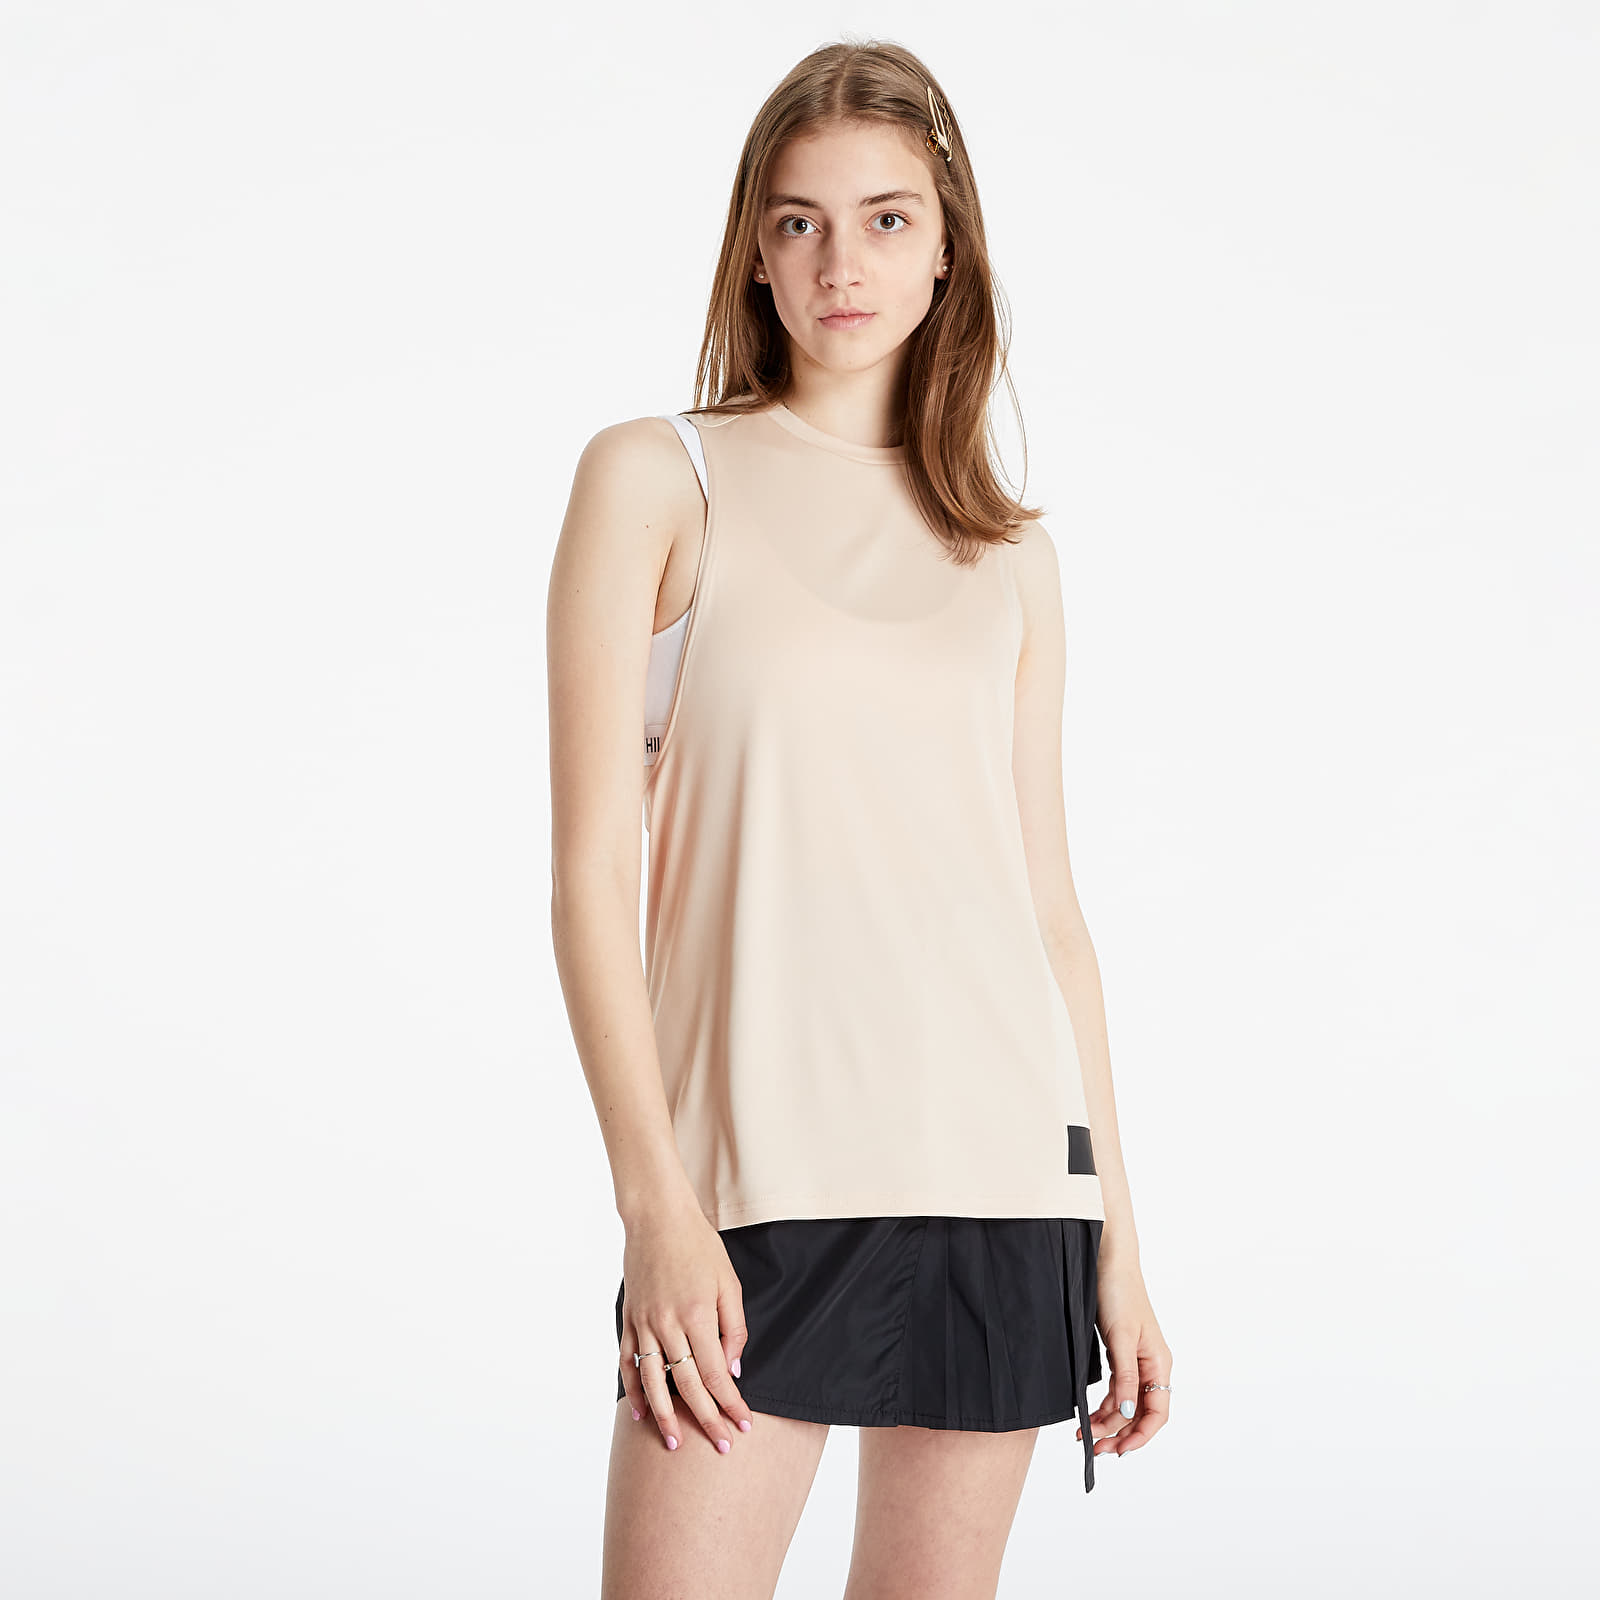 adidas Parley Mission Kit Run for the Oceans Tank Top Halo Blush